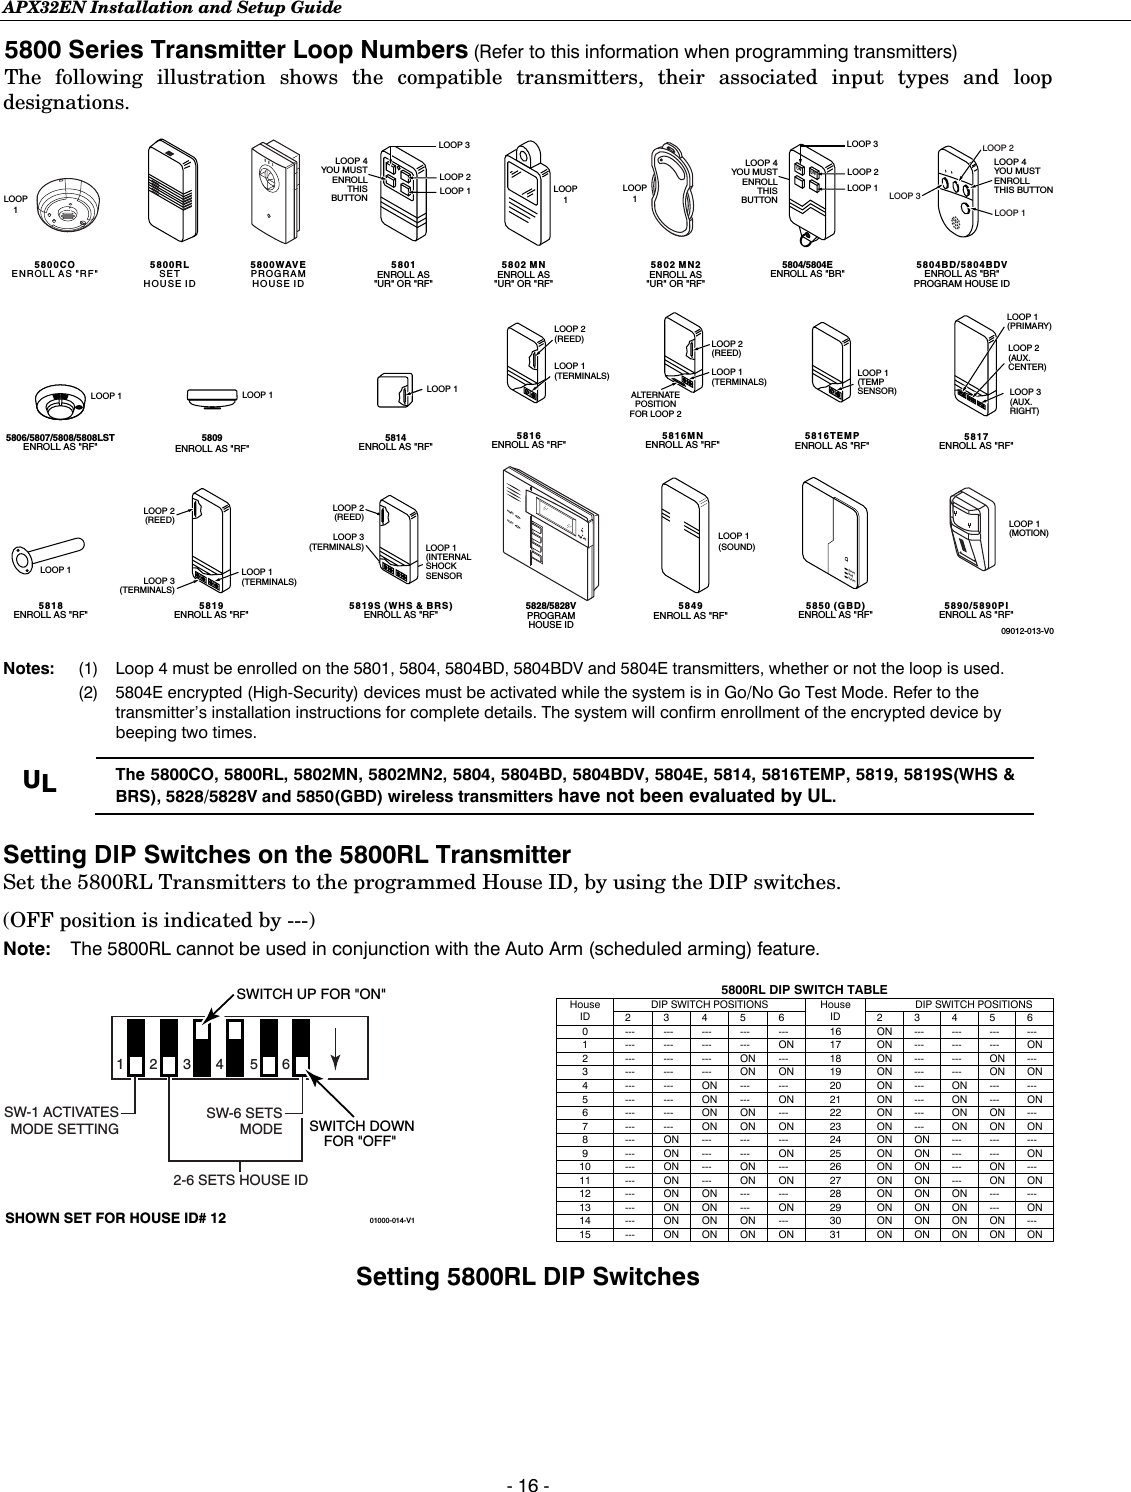 APX32EN Installation and Setup Guide - 16 - 5800 Series Transmitter Loop Numbers (Refer to this information when programming transmitters) The following illustration shows the compatible transmitters, their associated input types and loop designations.  LOOP 15806/5807/5808/5808LSTENROLL AS &quot;RF&quot;LOOP 15809ENROLL AS &quot;RF&quot;5818ENROLL AS &quot;RF&quot;LOOP 1LOOP 15814ENROLL AS &quot;RF&quot;09012-013-V05828/5828VPROGRAMHOUSE IDLOOP 1(MOTION)5890/5890PIENROLL AS &quot;RF&quot;LOOP15802 MNENROLL AS&quot;UR&quot; OR &quot;RF&quot;5804BD/5804BDVENROLL AS &quot;BR&quot;PROGRAM HOUSE IDLOOP 4YOU MUSTENROLLTHIS BUTTONLOOP 3LOOP 1LOOP 2•••••••••••••••••••5804/5804EENROLL AS &quot;BR&quot;LOOP 1LOOP 2LOOP 4YOU MUSTENROLLTHISBUTTONOFFLOOP 3ON5816TEMPENROLL AS &quot;RF&quot;LOOP 1(TEMPSENSOR)5817ENROLL AS &quot;RF&quot;LOOP 2(AUX.CENTER)LOOP 1(PRIMARY)LOOP 3(AUX.RIGHT)5816ENROLL AS &quot;RF&quot;LOOP 1(TERMINALS)LOOP 2(REED)5816MNENROLL AS &quot;RF&quot;LOOP 1(TERMINALS)ALTERNATEPOSITIONFOR LOOP 2LOOP 2(REED)LOOP 3(TERMINALS)5819S (WHS &amp; BRS)ENROLL AS &quot;RF&quot;LOOP 1(INTERNALSHOCKSENSORLOOP 2(REED)5819ENROLL AS &quot;RF&quot;LOOP 2(REED)LOOP 3(TERMINALS)LOOP 1(TERMINALS)5800WAVEPROGRAMHOUSE ID5800COENROLL AS &quot;RF&quot;5800RLSETHOUSE ID5801ENROLL AS&quot;UR&quot; OR &quot;RF&quot;LOOP 3LOOP 1LOOP 2LOOP 4YOU MUSTENROLLTHISBUTTON5849ENROLL AS &quot;RF&quot;LOOP 1(SOUND)5802 MN2ENROLL AS&quot;UR&quot; OR &quot;RF&quot;LOOP1LOOP15850 (GBD)ENROLL AS &quot;RF&quot;(Green)(Red)(Yellow)ARMEDREADY  Notes:  (1)  Loop 4 must be enrolled on the 5801, 5804, 5804BD, 5804BDV and 5804E transmitters, whether or not the loop is used.   (2)  5804E encrypted (High-Security) devices must be activated while the system is in Go/No Go Test Mode. Refer to the transmitter’s installation instructions for complete details. The system will confirm enrollment of the encrypted device by beeping two times.  UL The 5800CO, 5800RL, 5802MN, 5802MN2, 5804, 5804BD, 5804BDV, 5804E, 5814, 5816TEMP, 5819, 5819S(WHS &amp; BRS), 5828/5828V and 5850(GBD) wireless transmitters have not been evaluated by UL.   Setting DIP Switches on the 5800RL Transmitter  Set the 5800RL Transmitters to the programmed House ID, by using the DIP switches.  (OFF position is indicated by ---)  Note:  The 5800RL cannot be used in conjunction with the Auto Arm (scheduled arming) feature.   01000-014-V1234561SW-6 SETSMODE2-6 SETS HOUSE IDSW-1 ACTIVATESMODE SETTING SWITCH DOWNFOR &quot;OFF&quot; SHOWN SET FOR HOUSE ID# 12SWITCH UP FOR &quot;ON&quot;  5800RL DIP SWITCH TABLE DIP SWITCH POSITIONS  DIP SWITCH POSITIONS House ID  2 3 4 5 6 House ID  2 3 4 5 6 0  --- --- --- --- ---  16  ON --- --- --- --- 1  --- --- --- --- ON  17  ON --- --- --- ON 2  --- --- --- ON ---  18  ON --- --- ON --- 3  --- --- --- ON ON  19  ON --- --- ON ON 4  --- --- ON --- ---  20  ON --- ON --- --- 5  --- --- ON --- ON  21  ON --- ON --- ON 6  ---  ---  ON ON  ---  22  ON ---  ON ON --- 7  ---  ---  ON ON ON  23  ON ---  ON ON ON 8  --- ON --- --- ---  24  ON ON --- --- --- 9  --- ON --- --- ON  25  ON ON --- --- ON 10  ---  ON ---  ON ---  26  ON ON ---  ON --- 11  ---  ON ---  ON  ON  27  ON ON ---  ON ON 12  ---  ON ON ---  ---  28  ON ON ON ---  --- 13  ---  ON ON ---  ON  29  ON ON ON ---  ON 14  ---  ON ON ON ---  30  ON ON ON ON --- 15  ---  ON ON ON ON  31  ON ON ON ON ON   Setting 5800RL DIP Switches